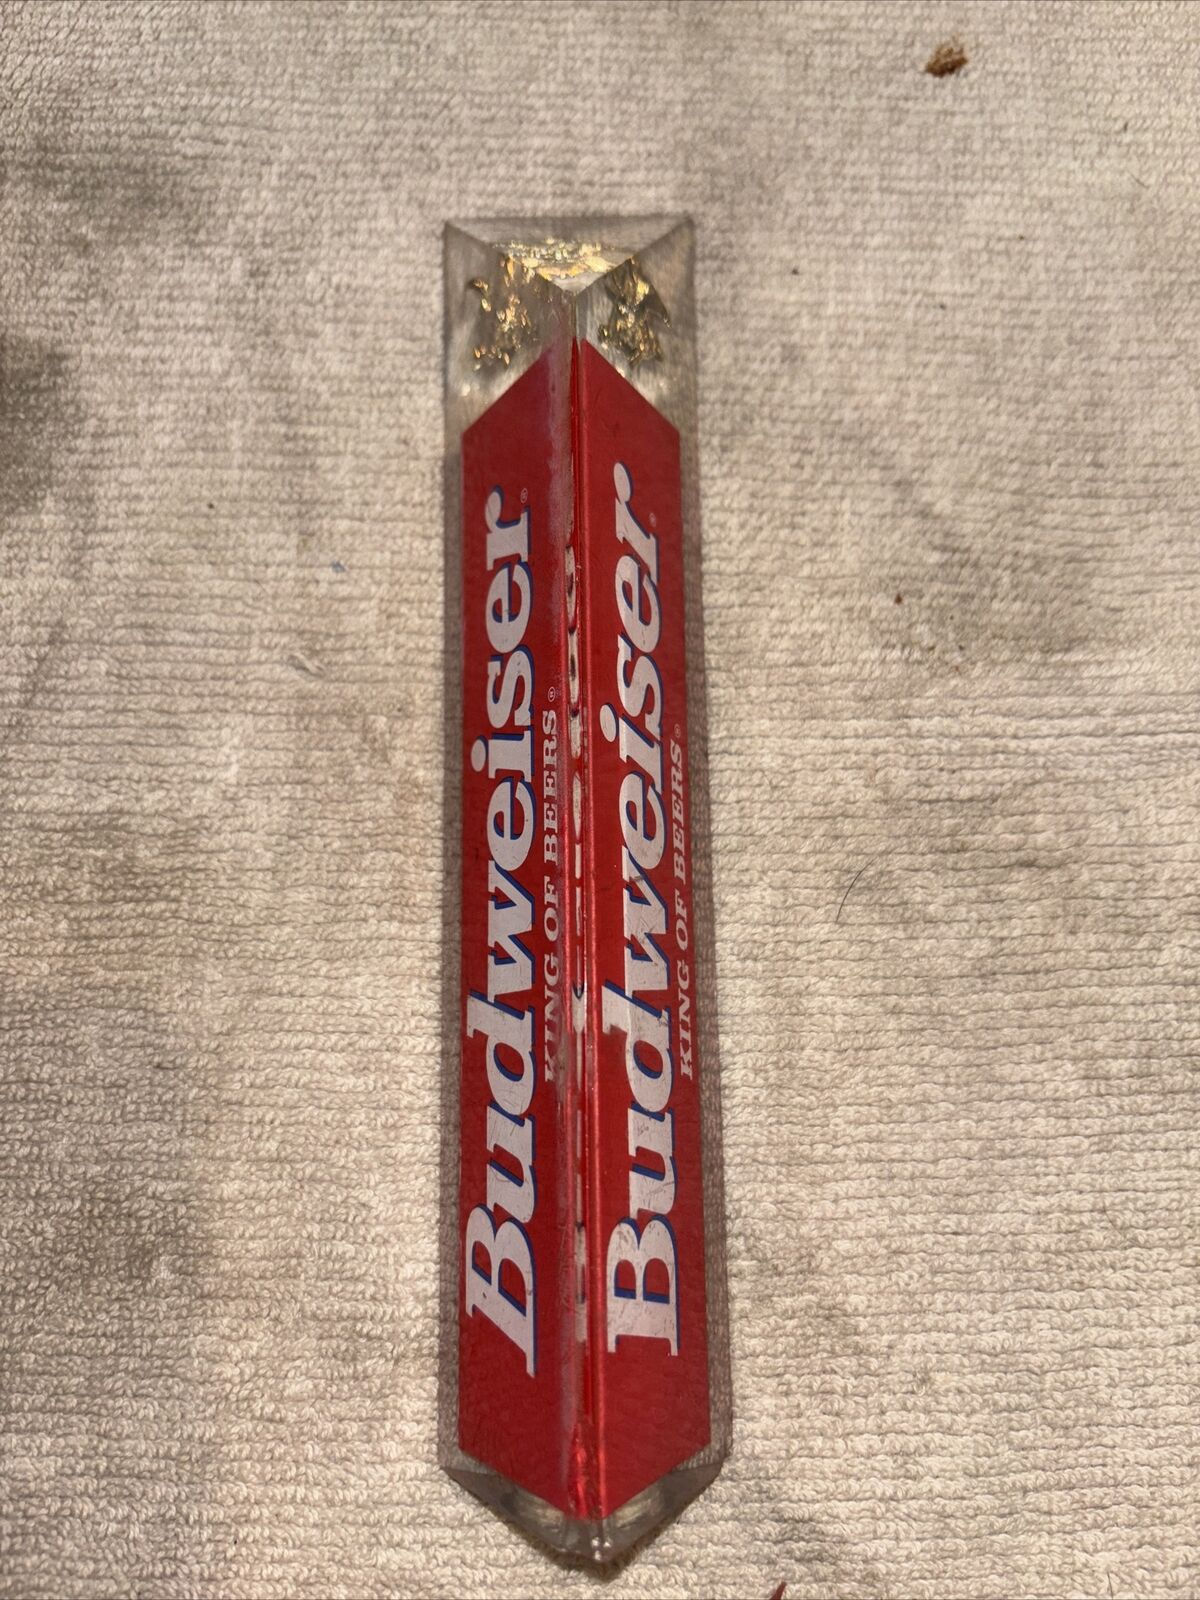 Budweiser: King Of Beers: Acrylic Beer Tap Handle: 3 Sided: 8 Inches Long